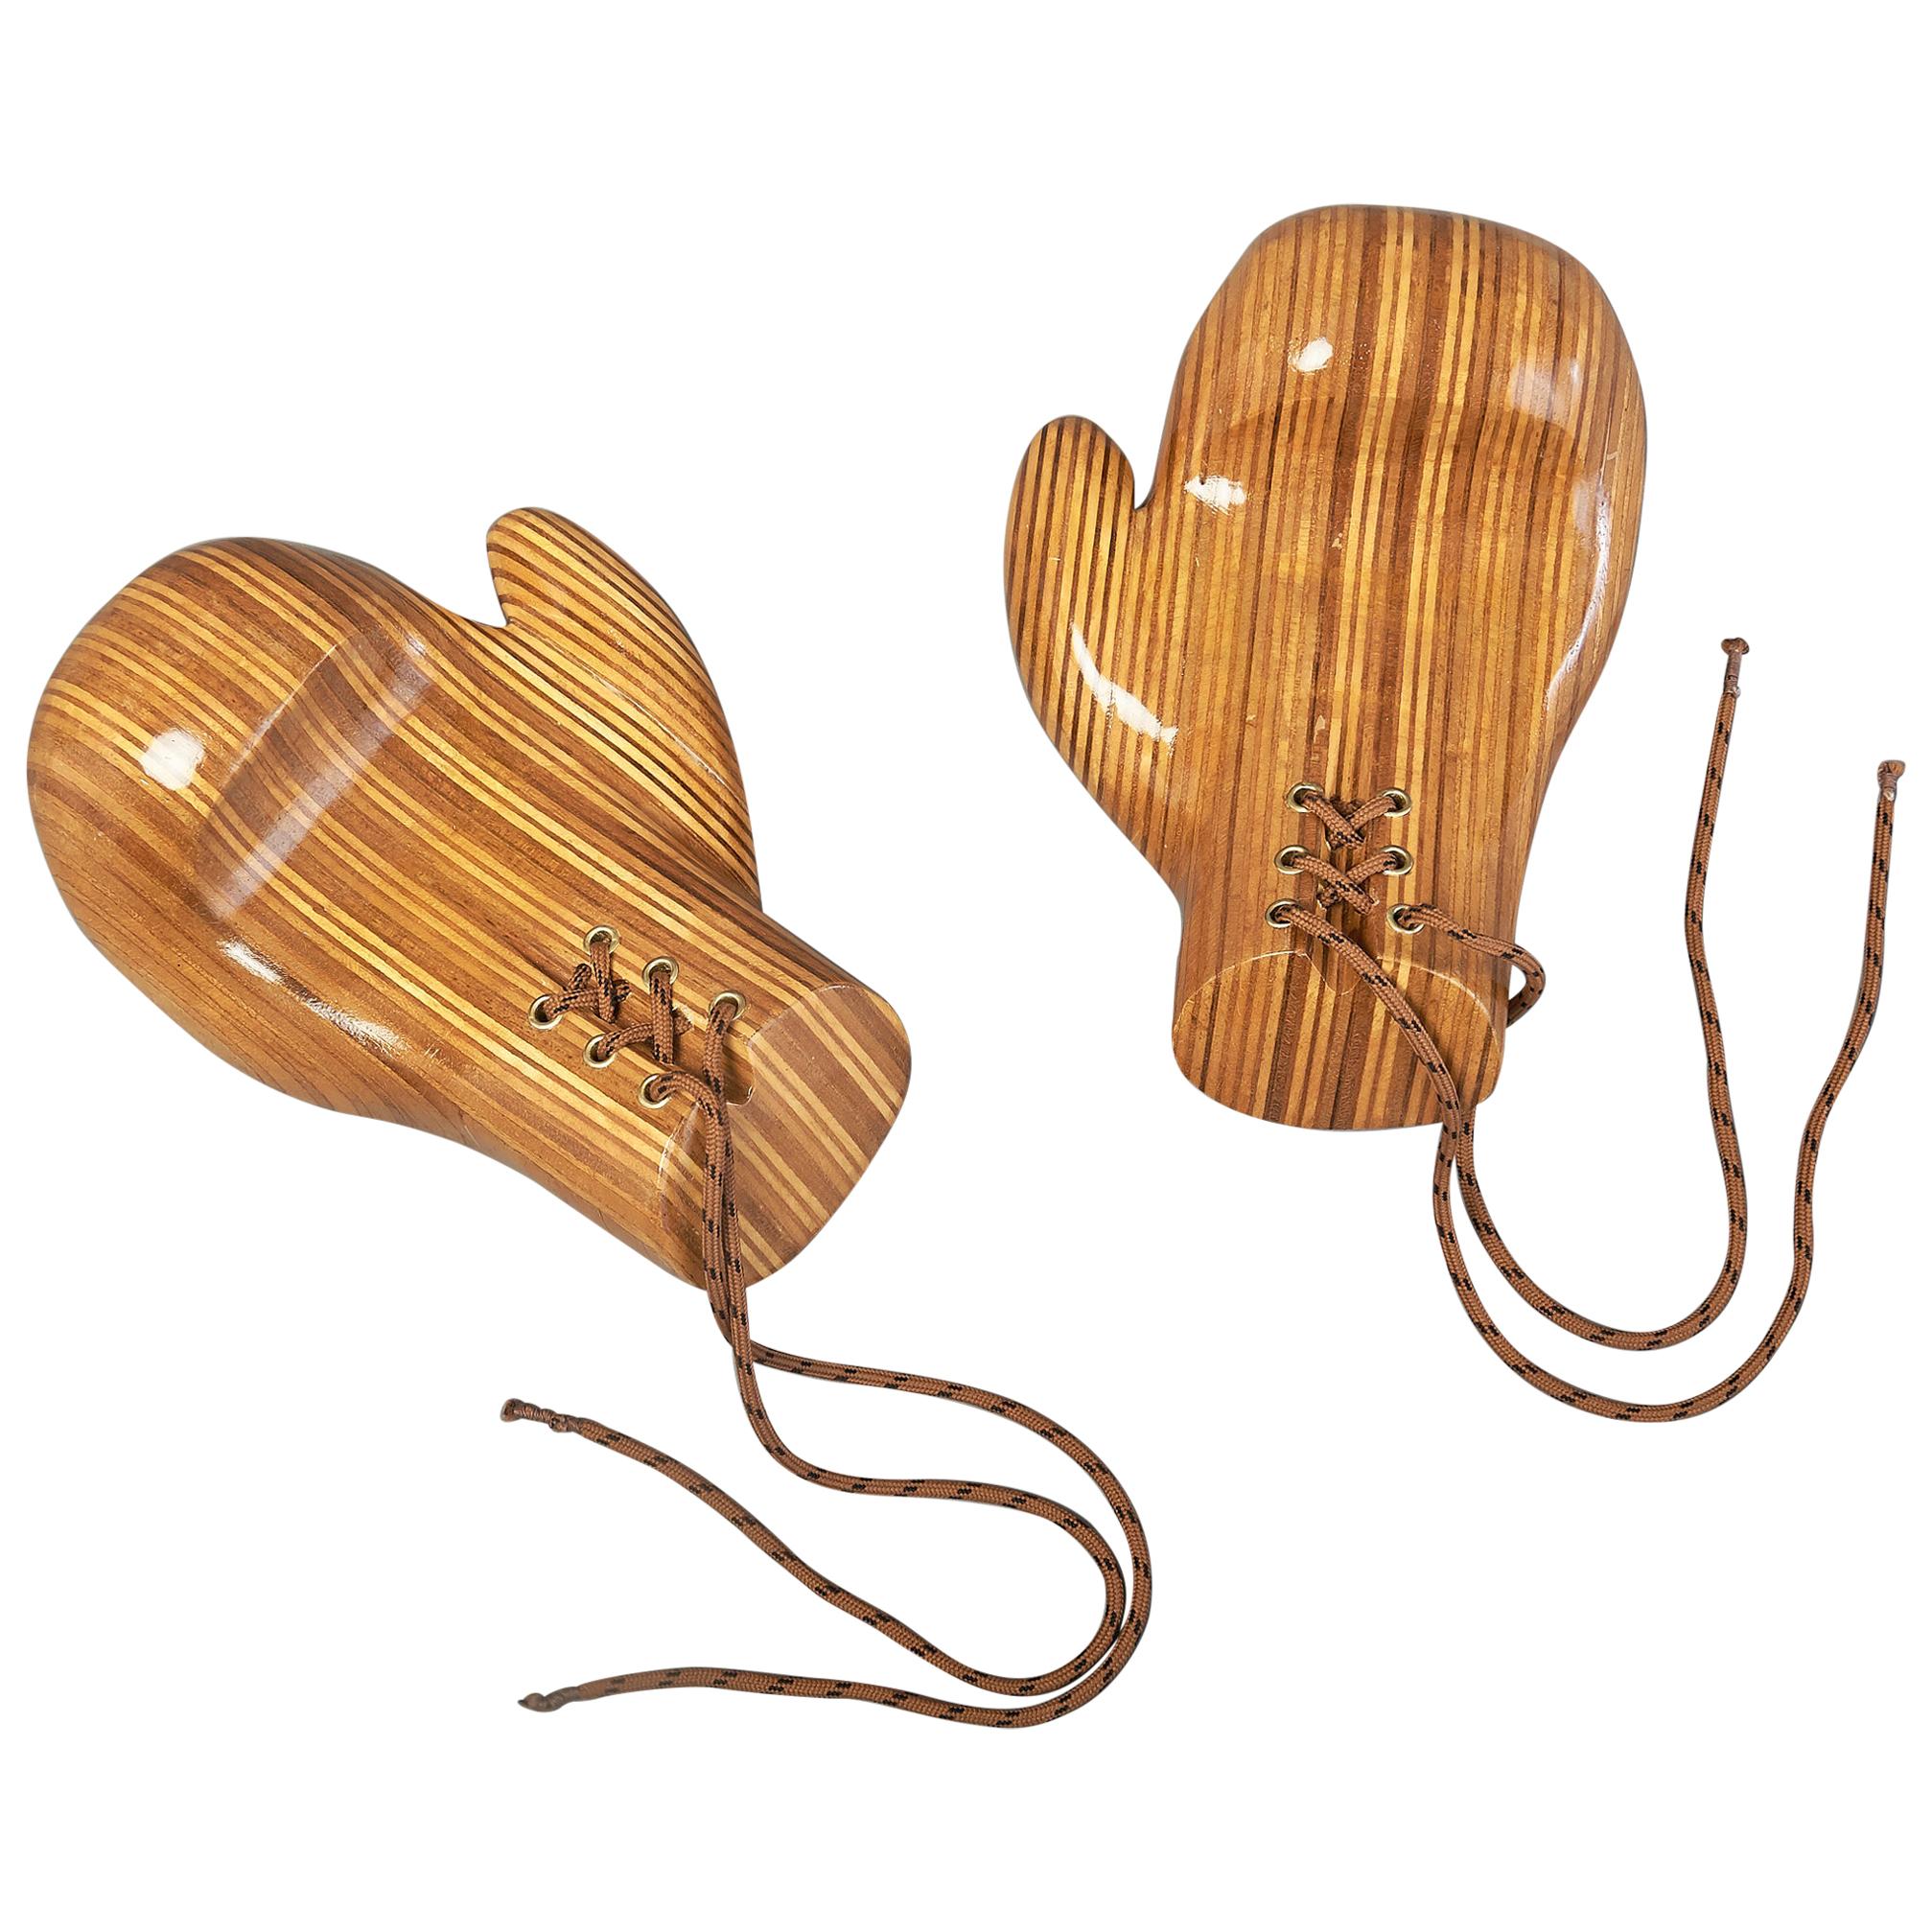 Sculptural Pair of Boxing Gloves in Polished Laminated Wood